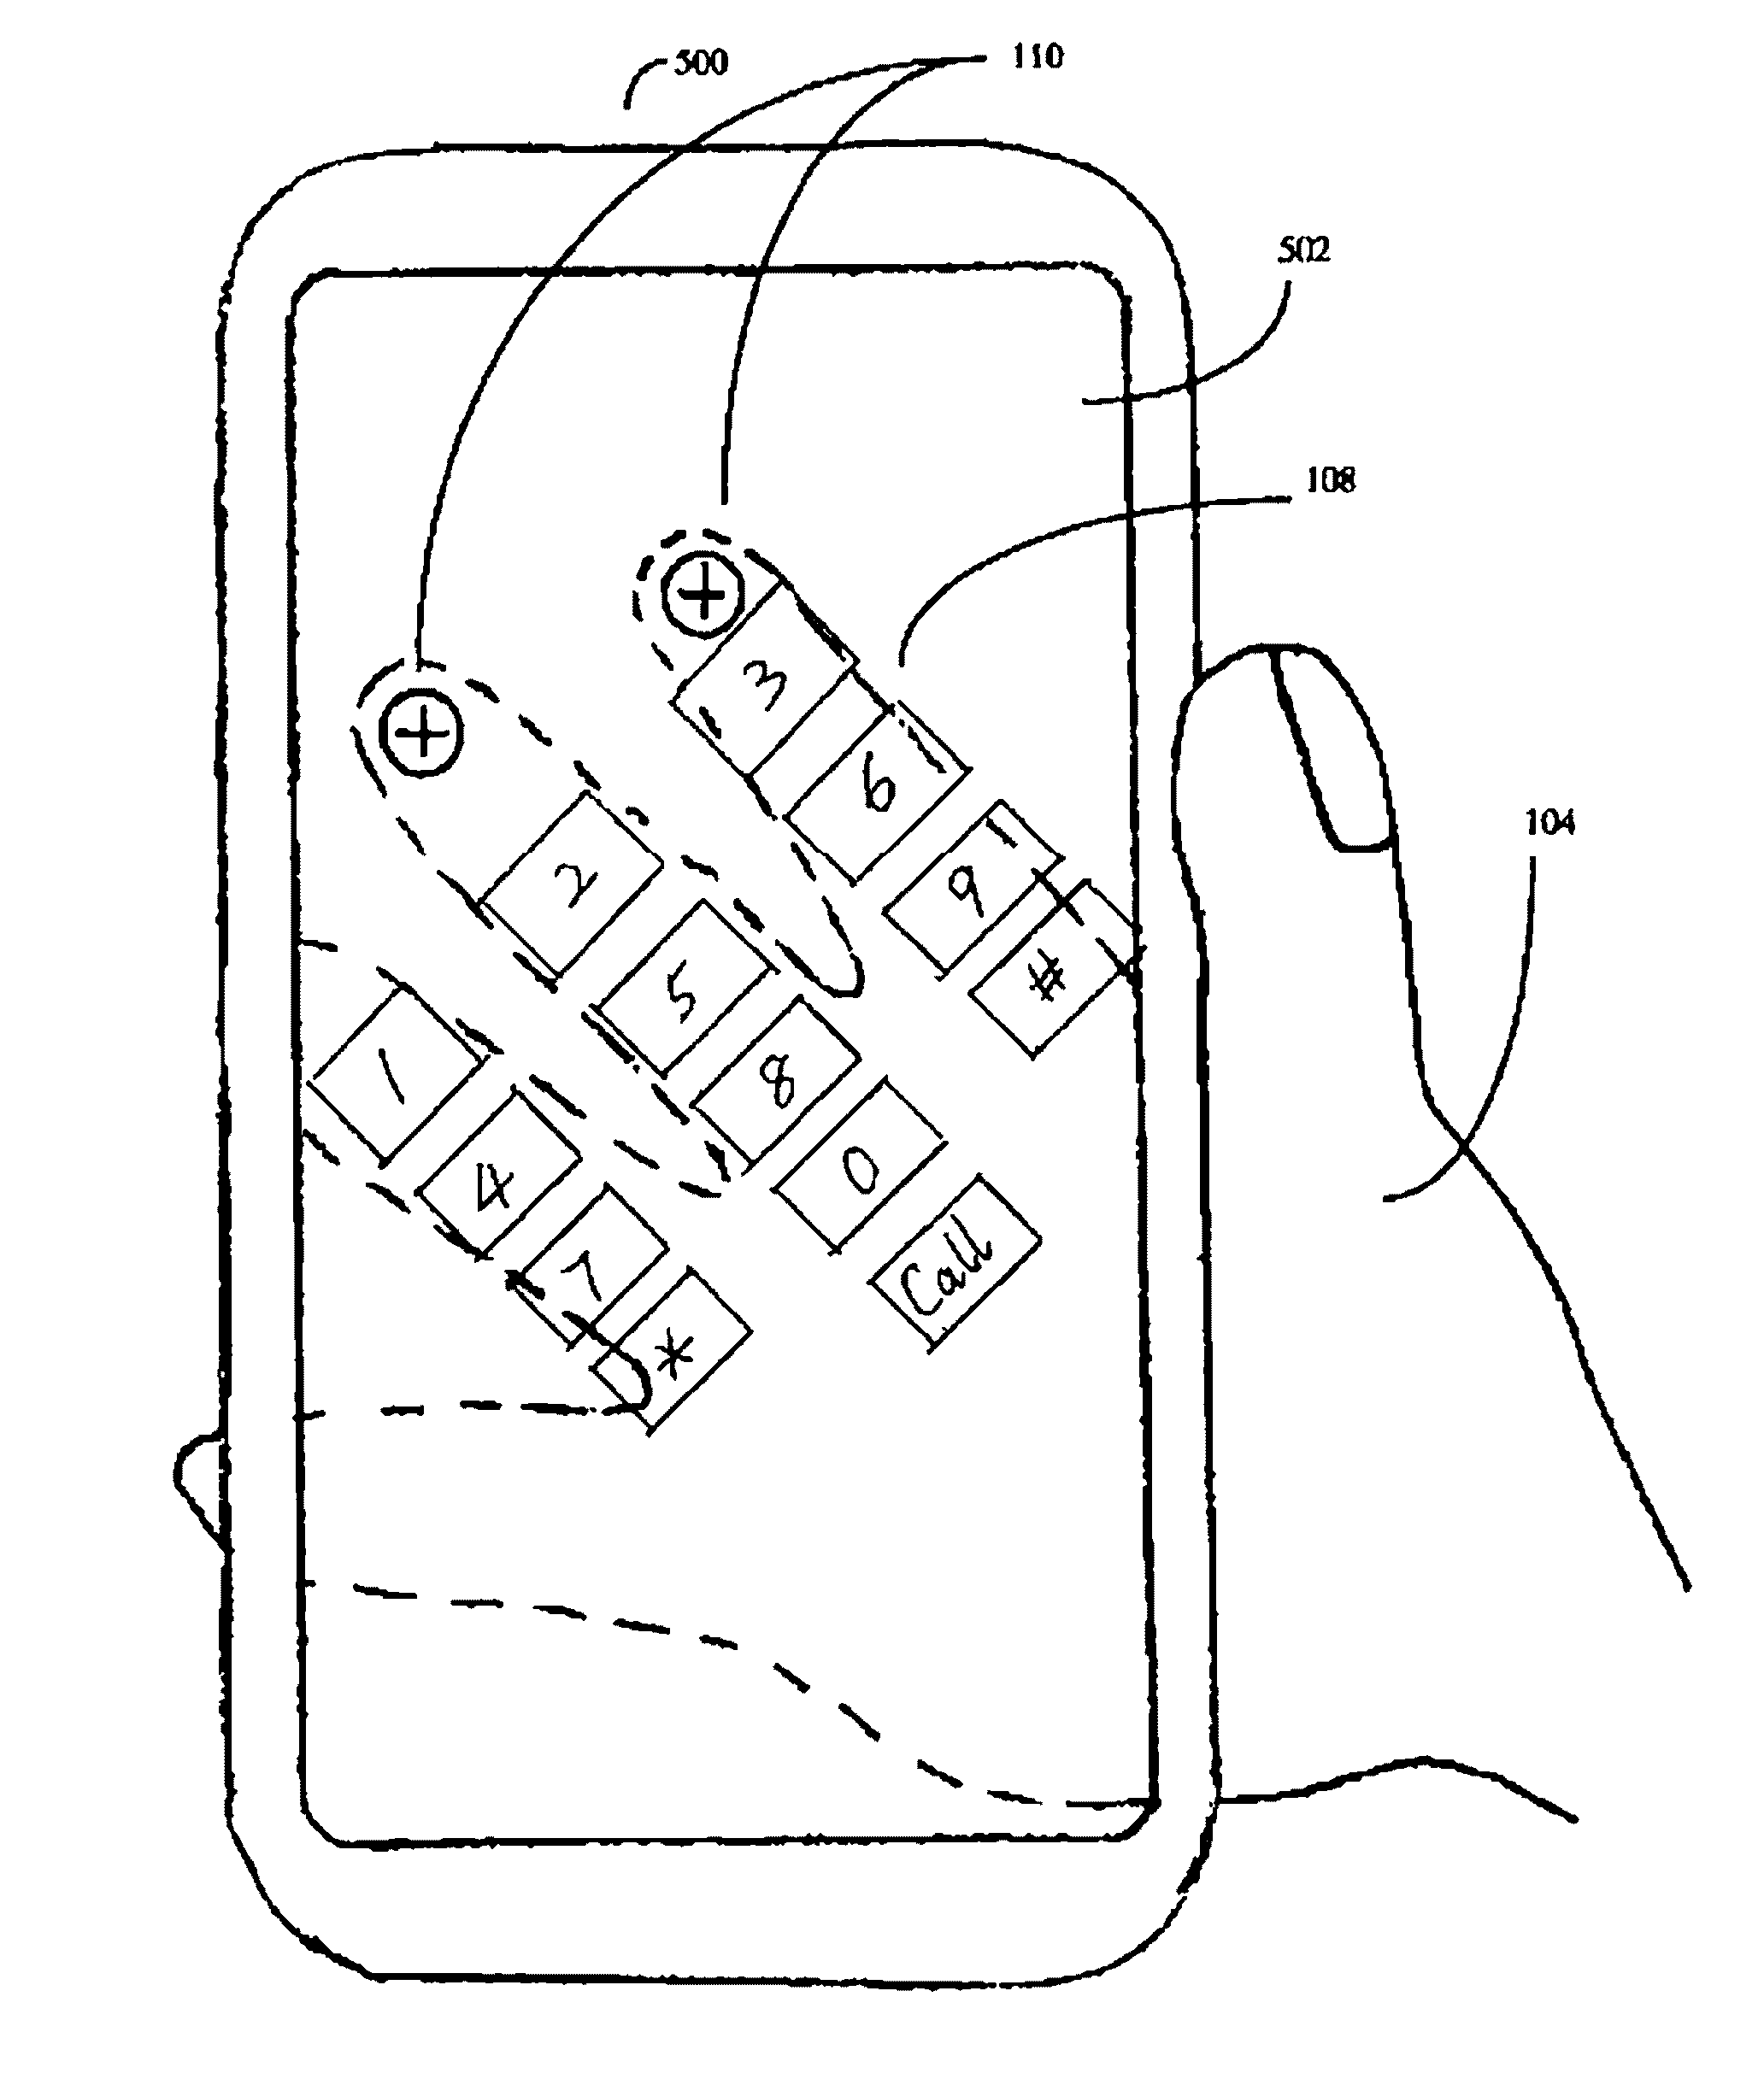 Front touchscreen and back touchpad operated user interface employing semi-persistent button groups